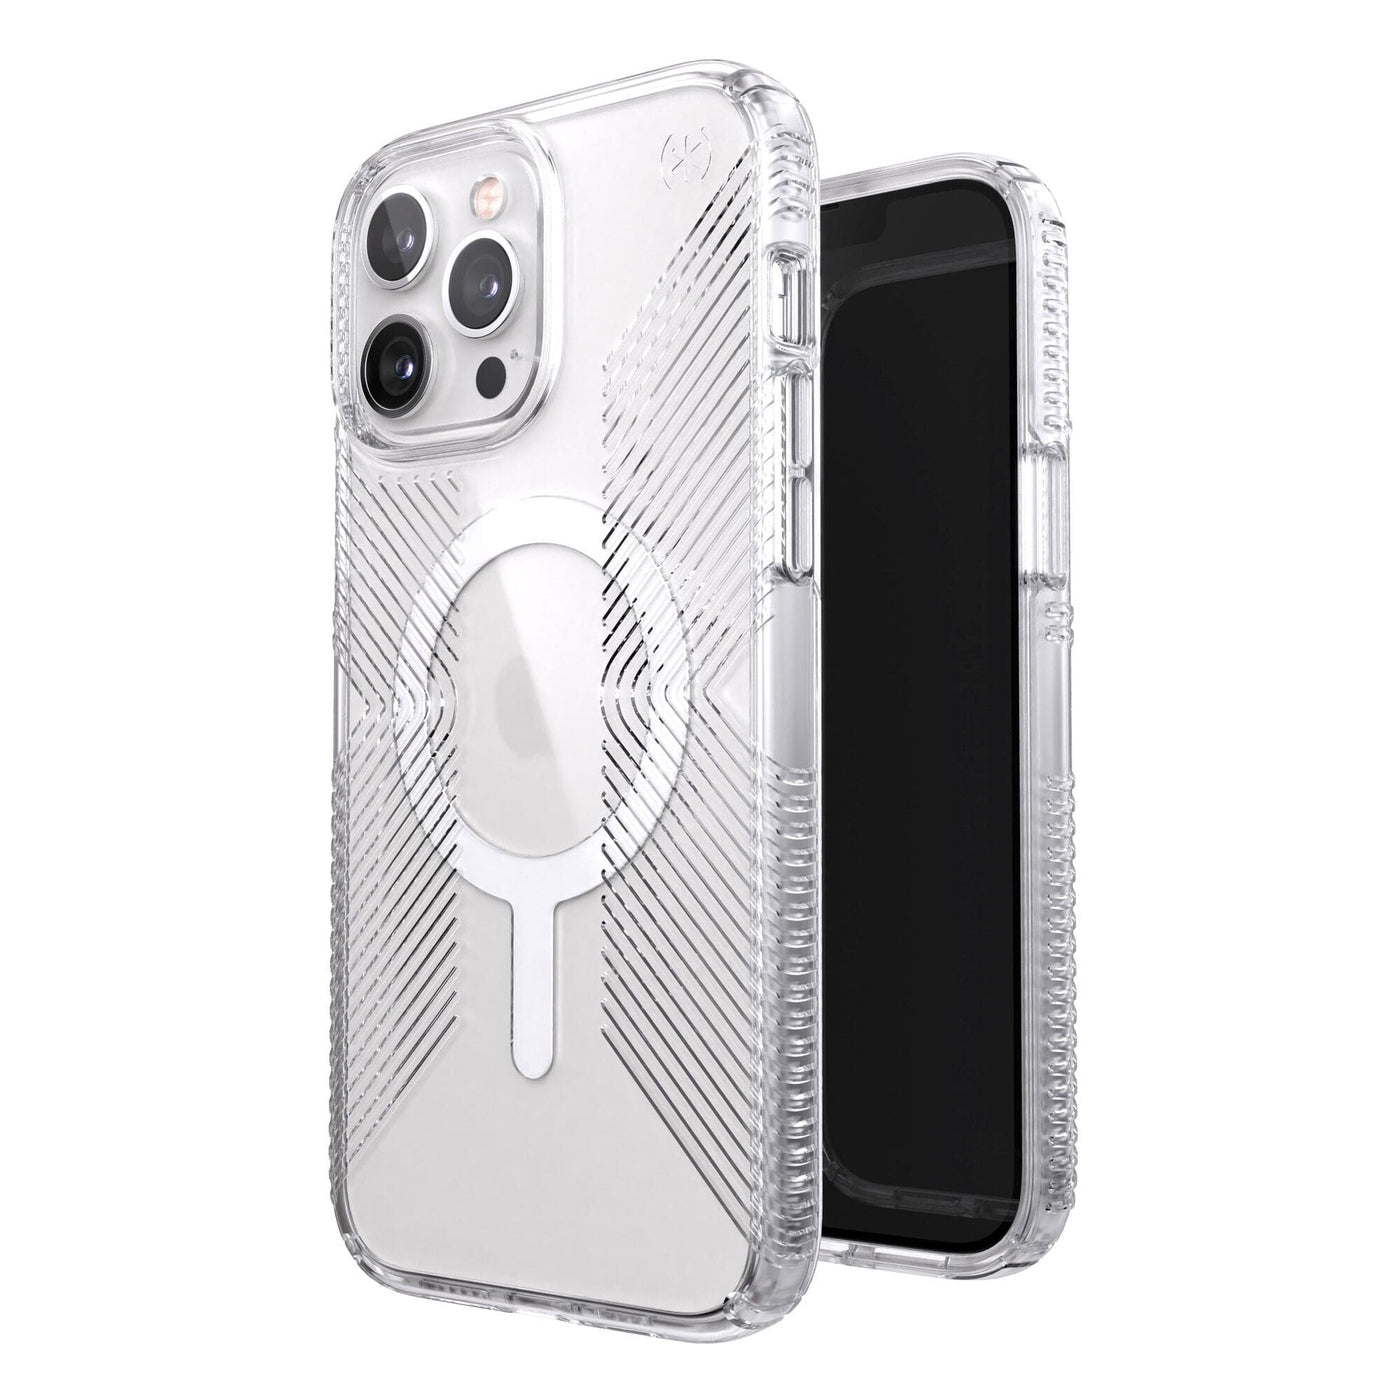 Speck iPhone 13 Pro Max Case - Drop Protection Fits iPhone 12 Pro Max &  iPhone 13 Pro Max Phones - Clear Case, Built for MagSafe - Anti-Yellowing 